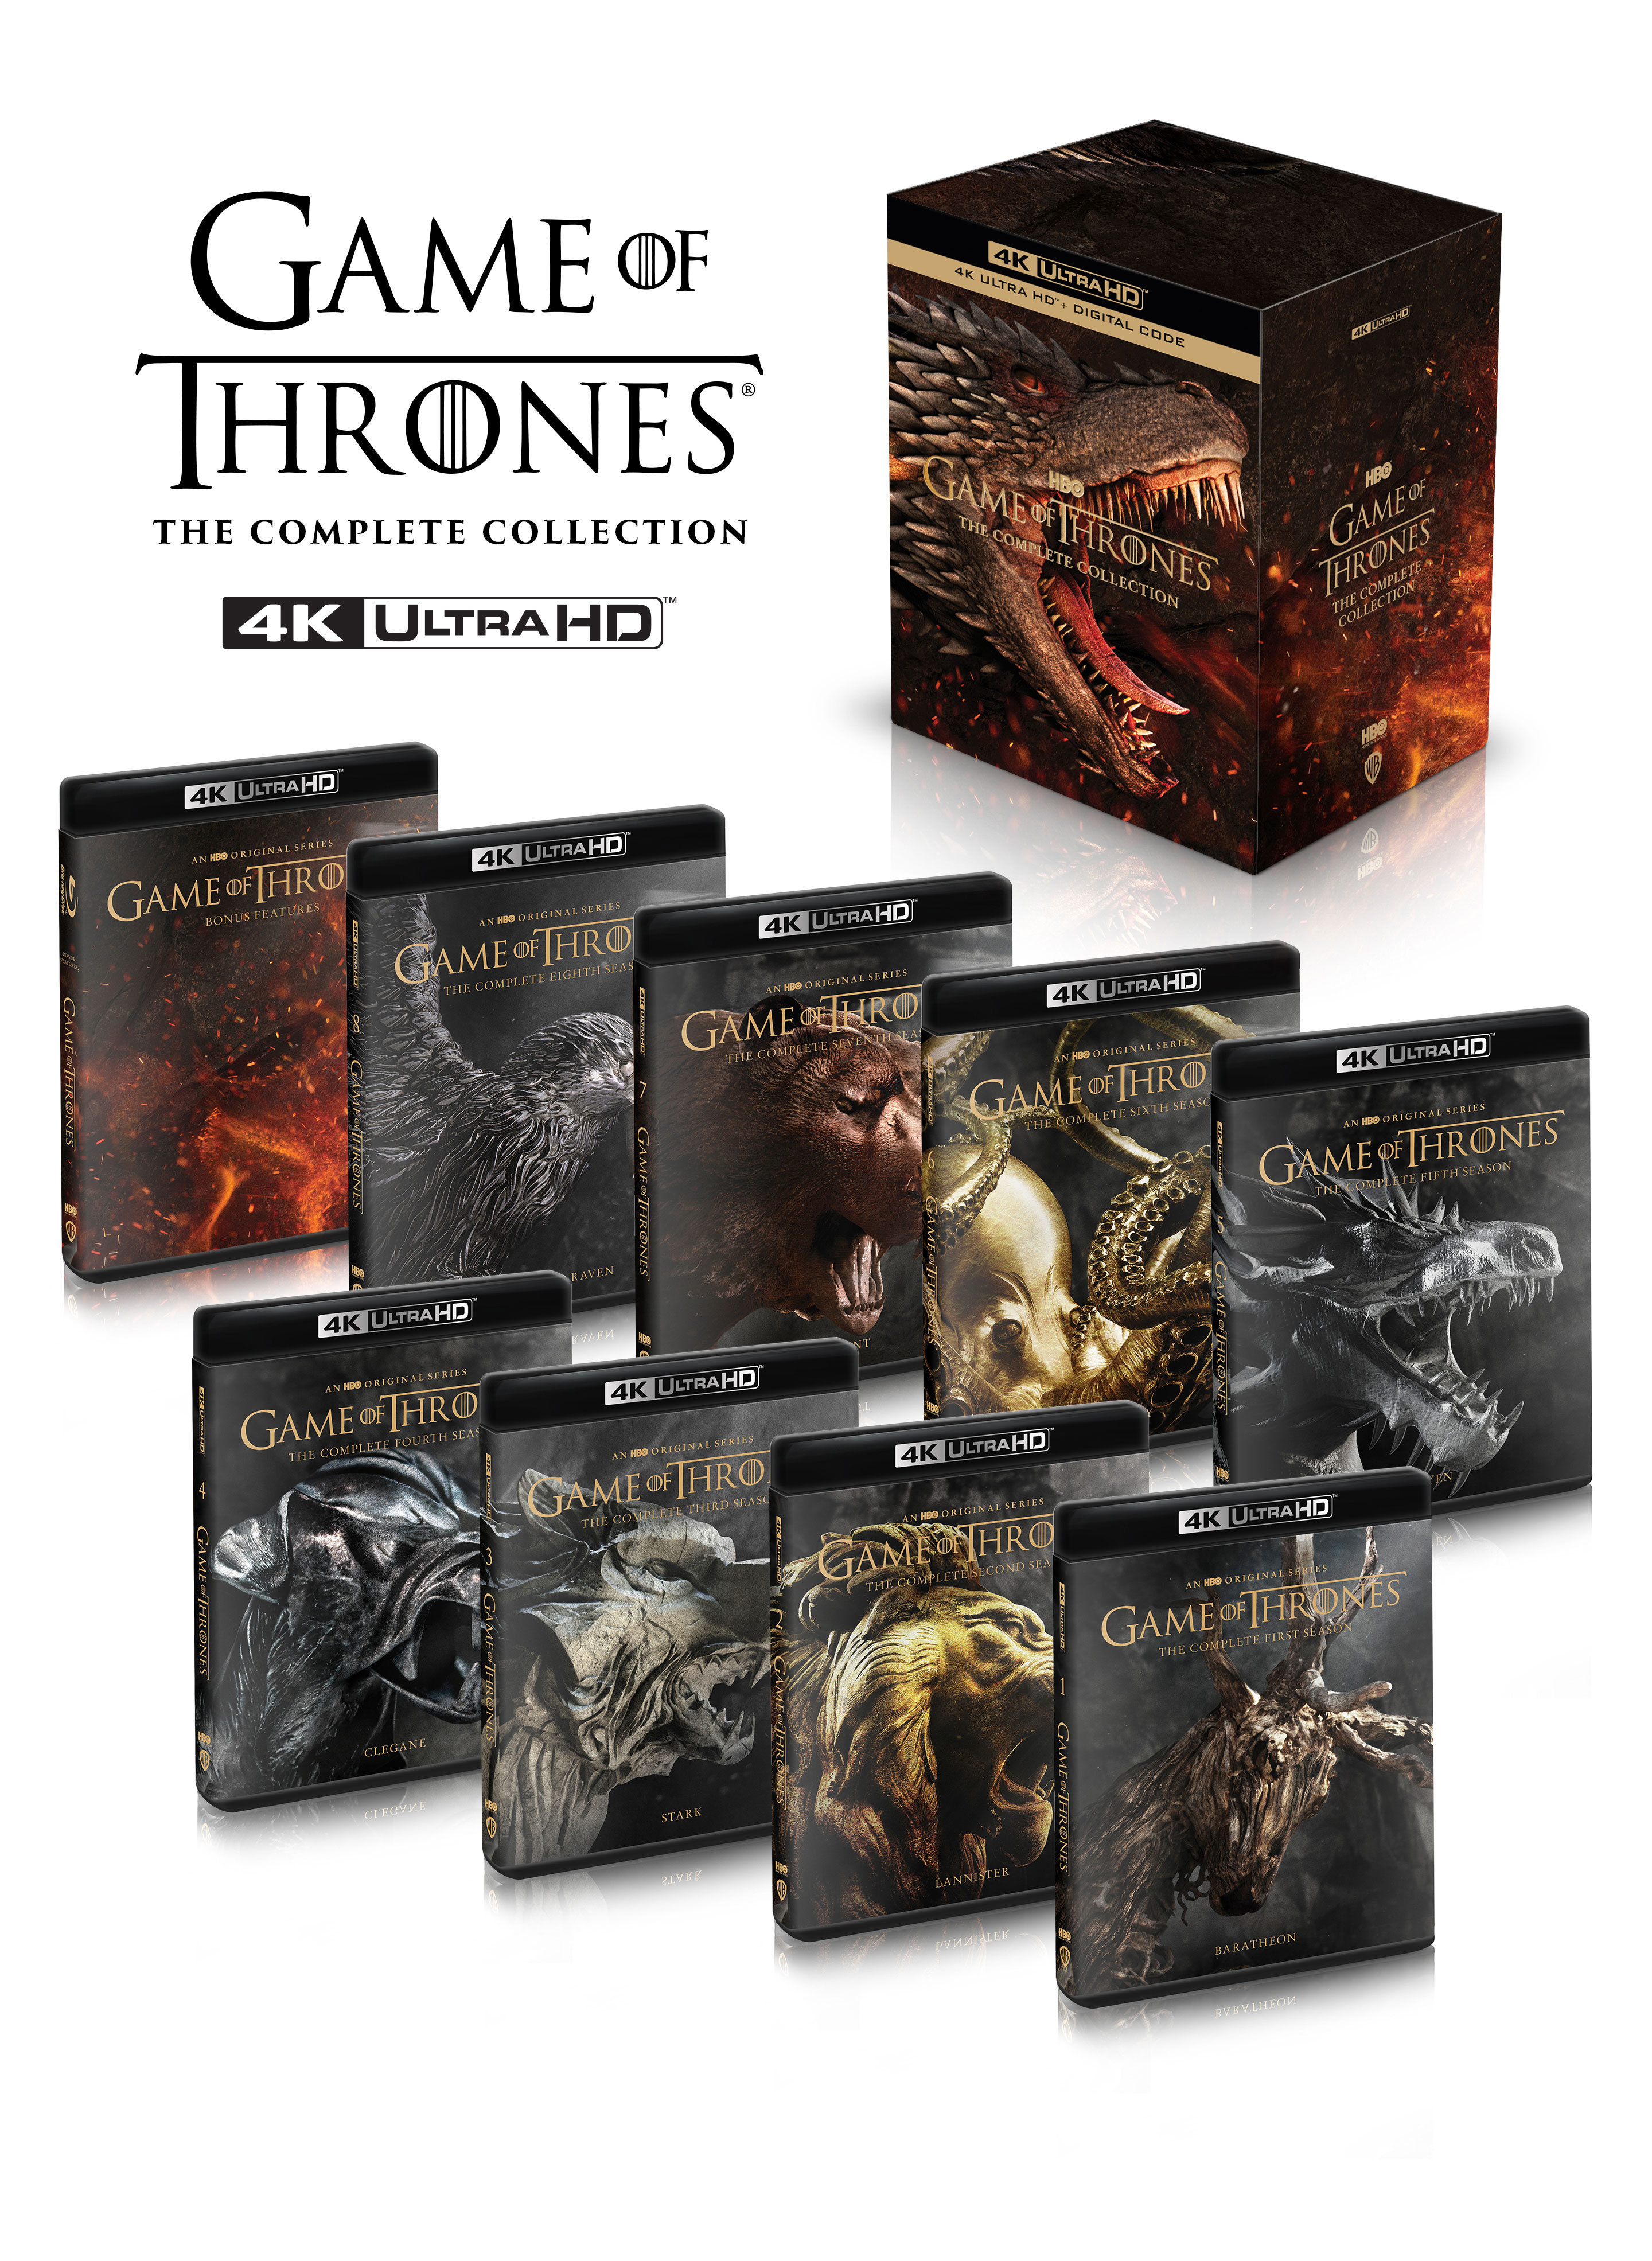 Game Of Thrones Complete Series Blu Ray Hot Deals, Save 58% | jlcatj.gob.mx